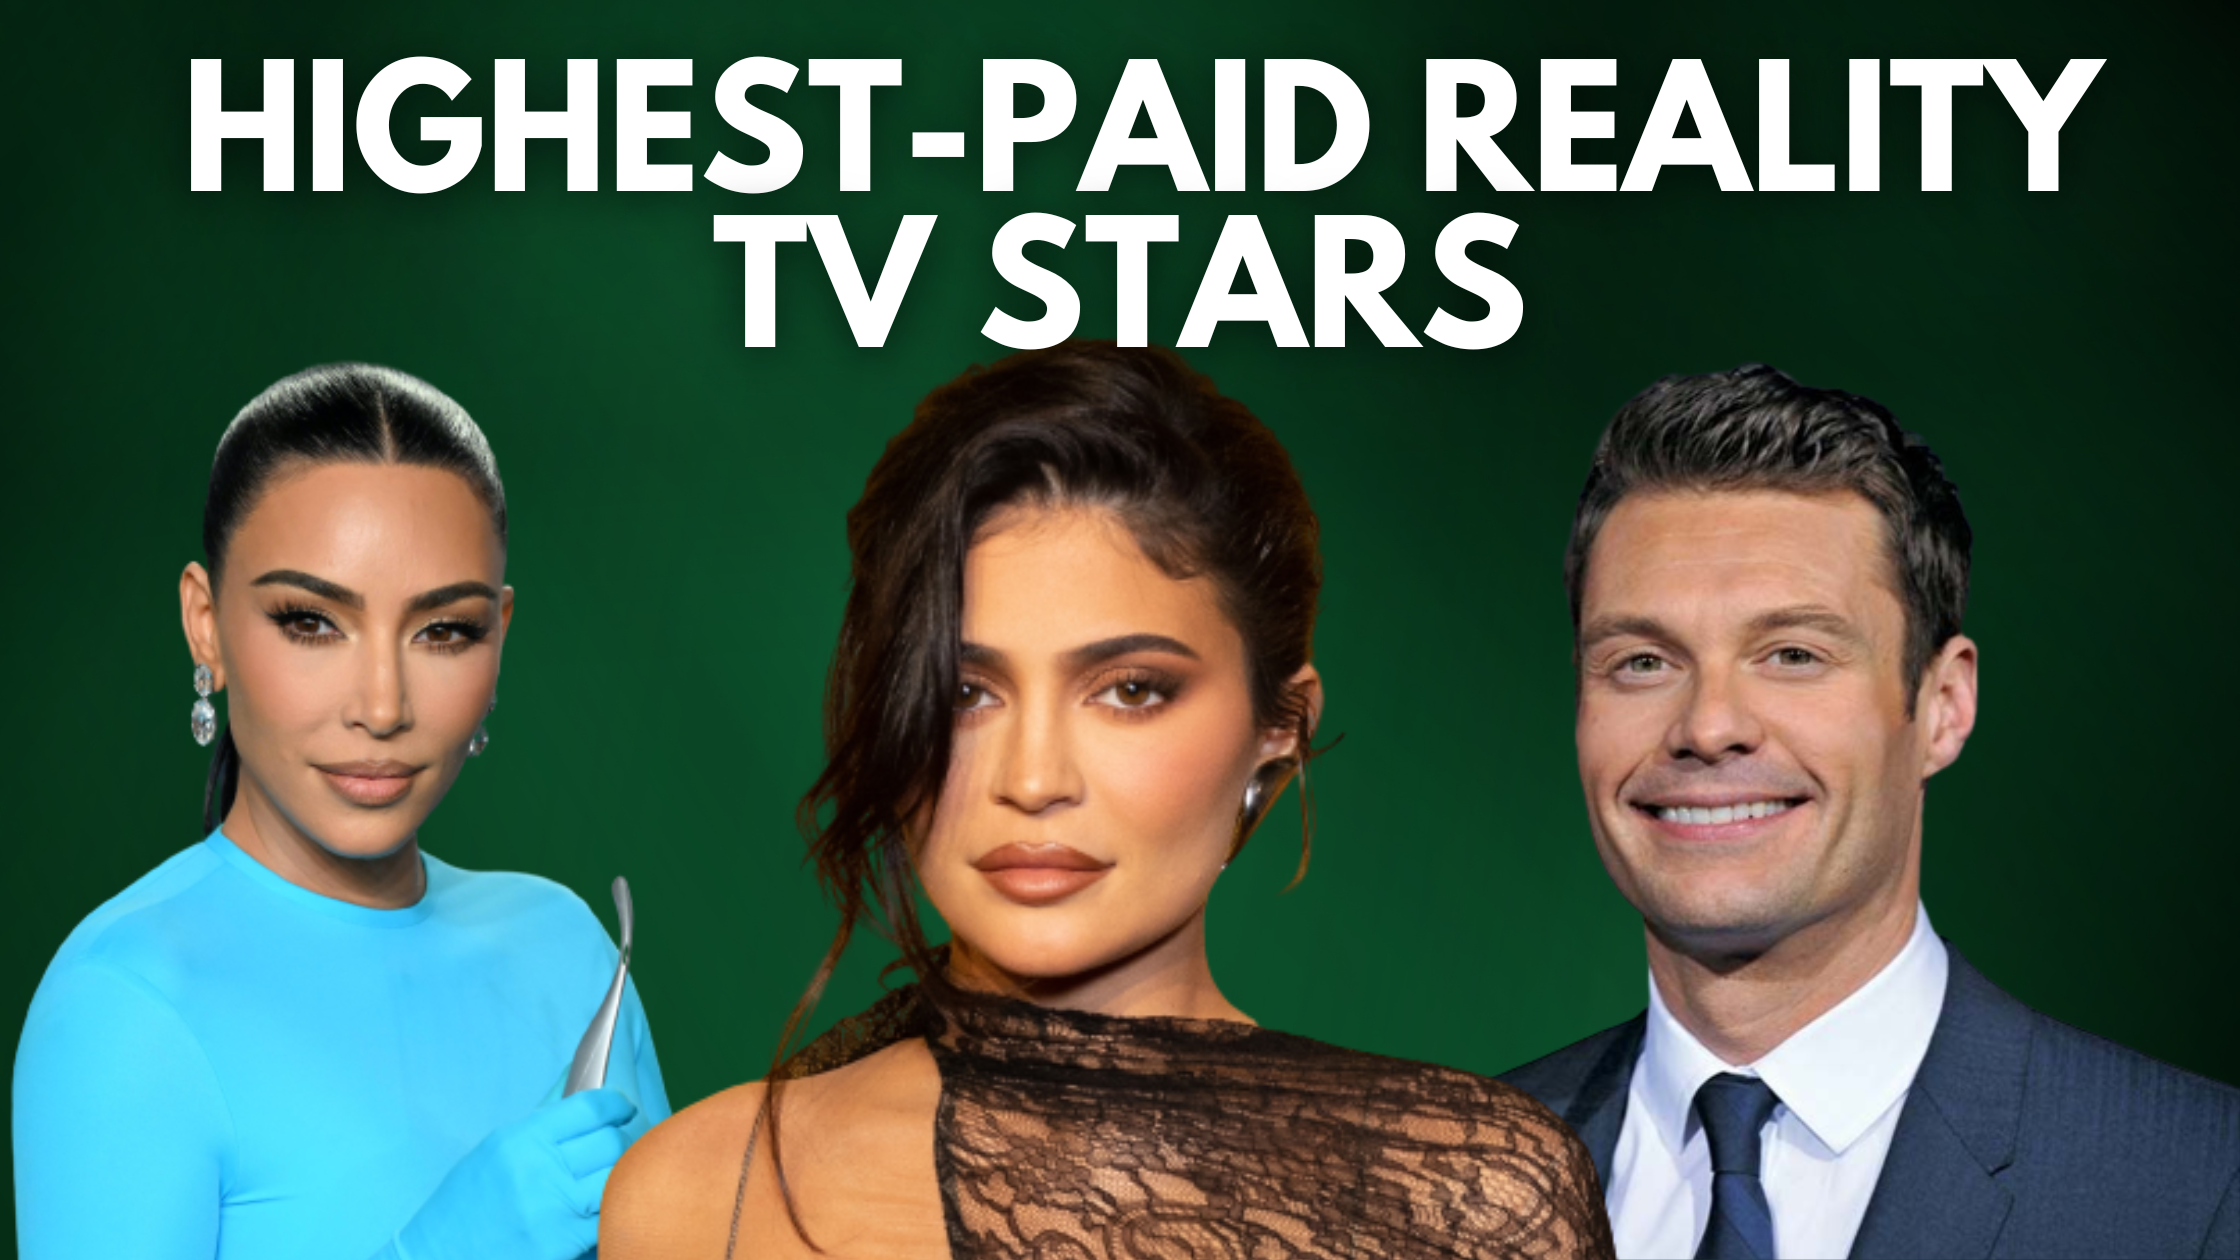 Top 10 Highest-Paid Reality TV Stars In The World